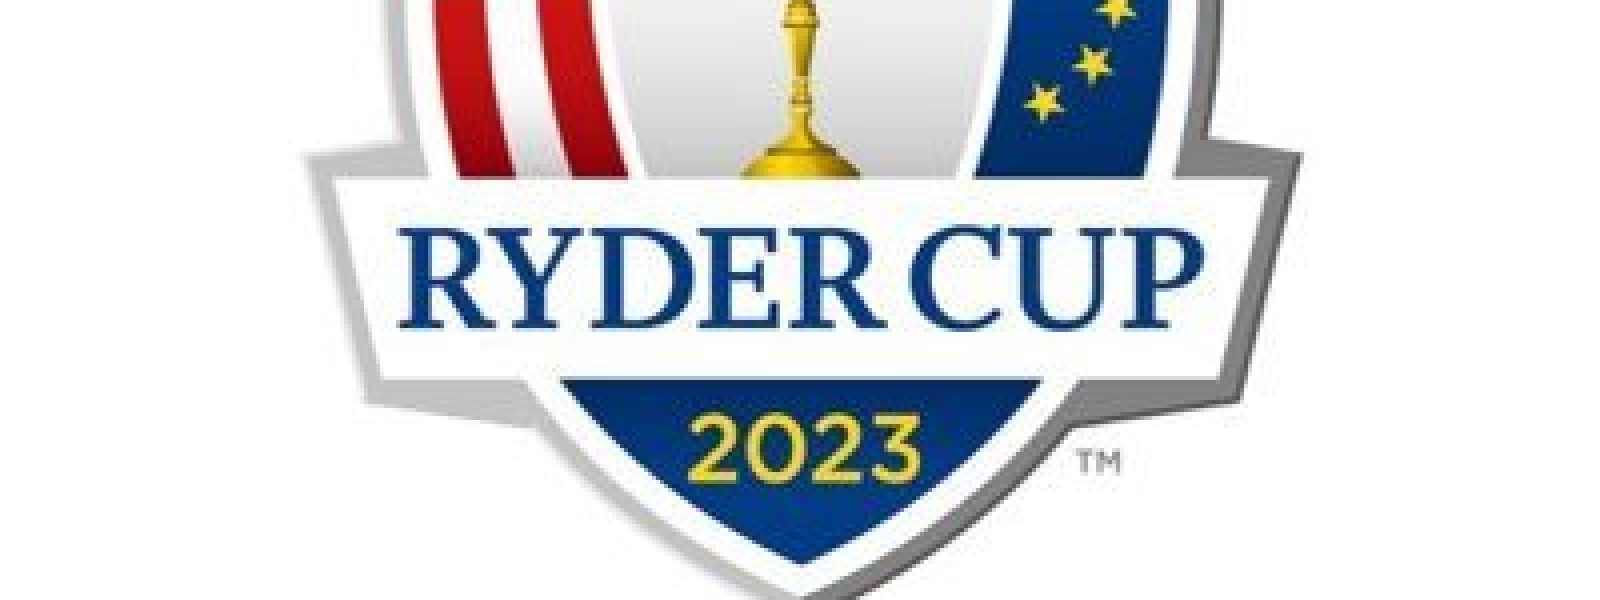 Marco-Simone-Ryder-Cup